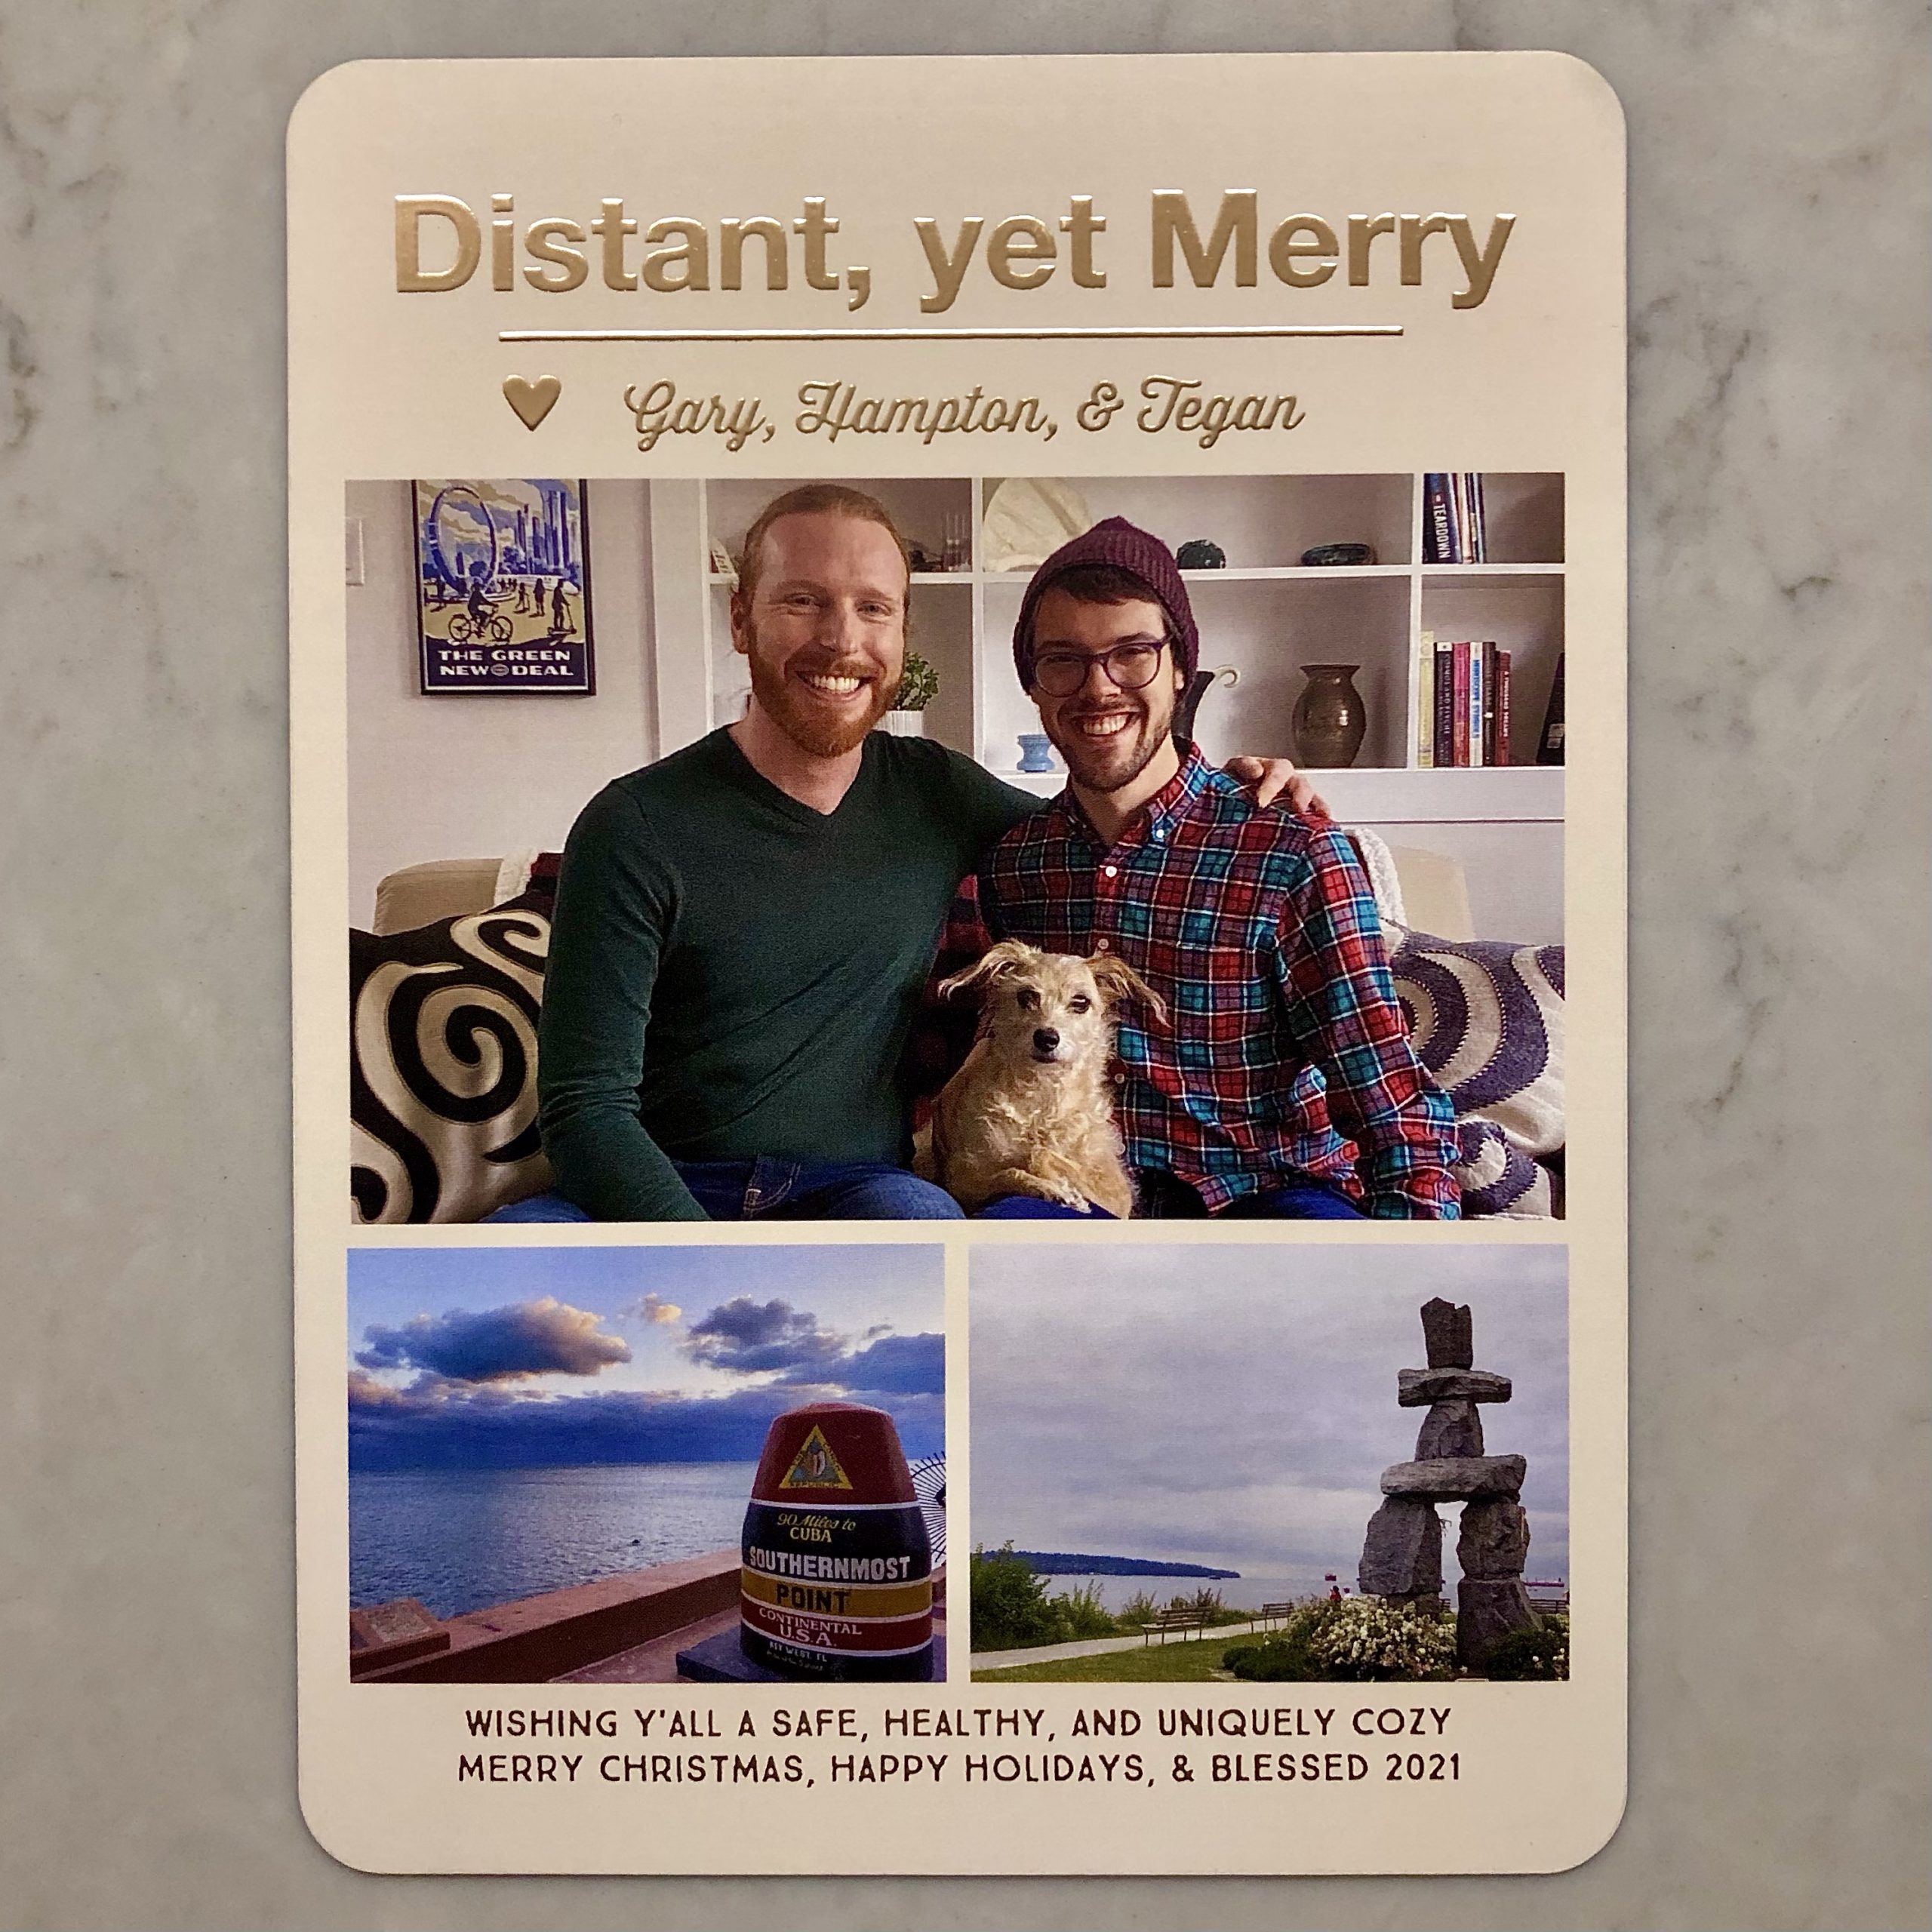 Front of card.
Distant, yet Merry
<3 Gary, Hampton, & Tegan
[Photo: Hampton, Tegan, and Gary smiling on the couch in our apartment.]
[Photo diptych: L, the marker of the Southernmost Point in the Continental USA in Key West, FL, with the Caribbean Sea behind it; R, the Ilanaaq Inukshuk at English Bay Beach in Vancouver, BC, with Kitsilano and the Pacific Ocean behind it.]
Wishing y'all a safe, healthy, and uniquely cosy Merry Christmas, Happy Holidays, & Blessed 2021